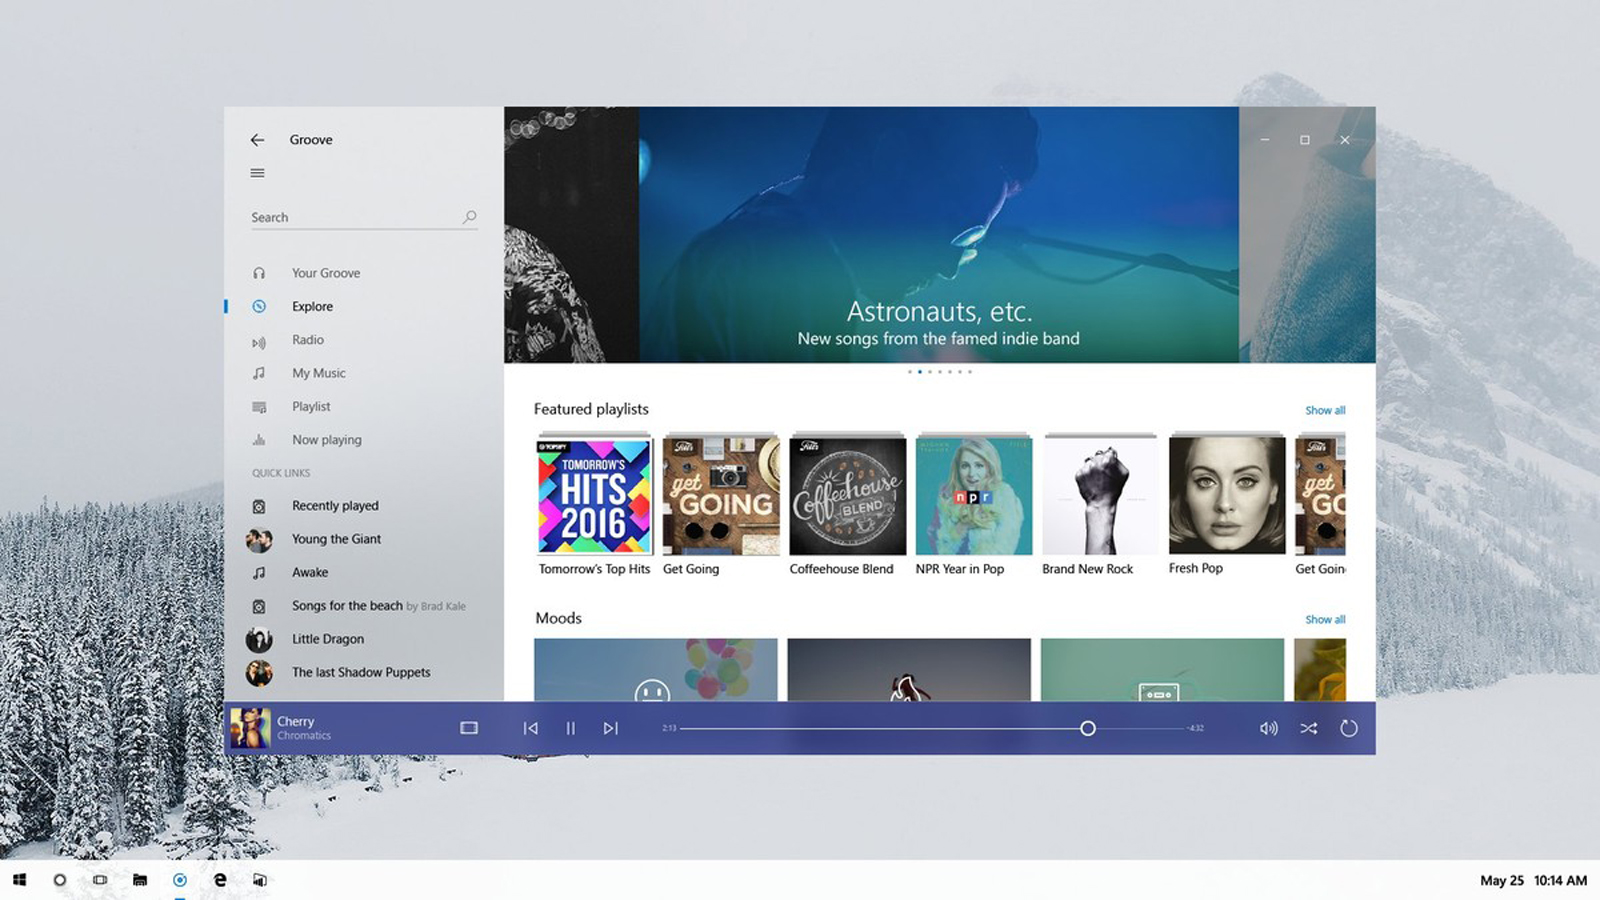 Windows 10's 'Project Neon' interface in concept form